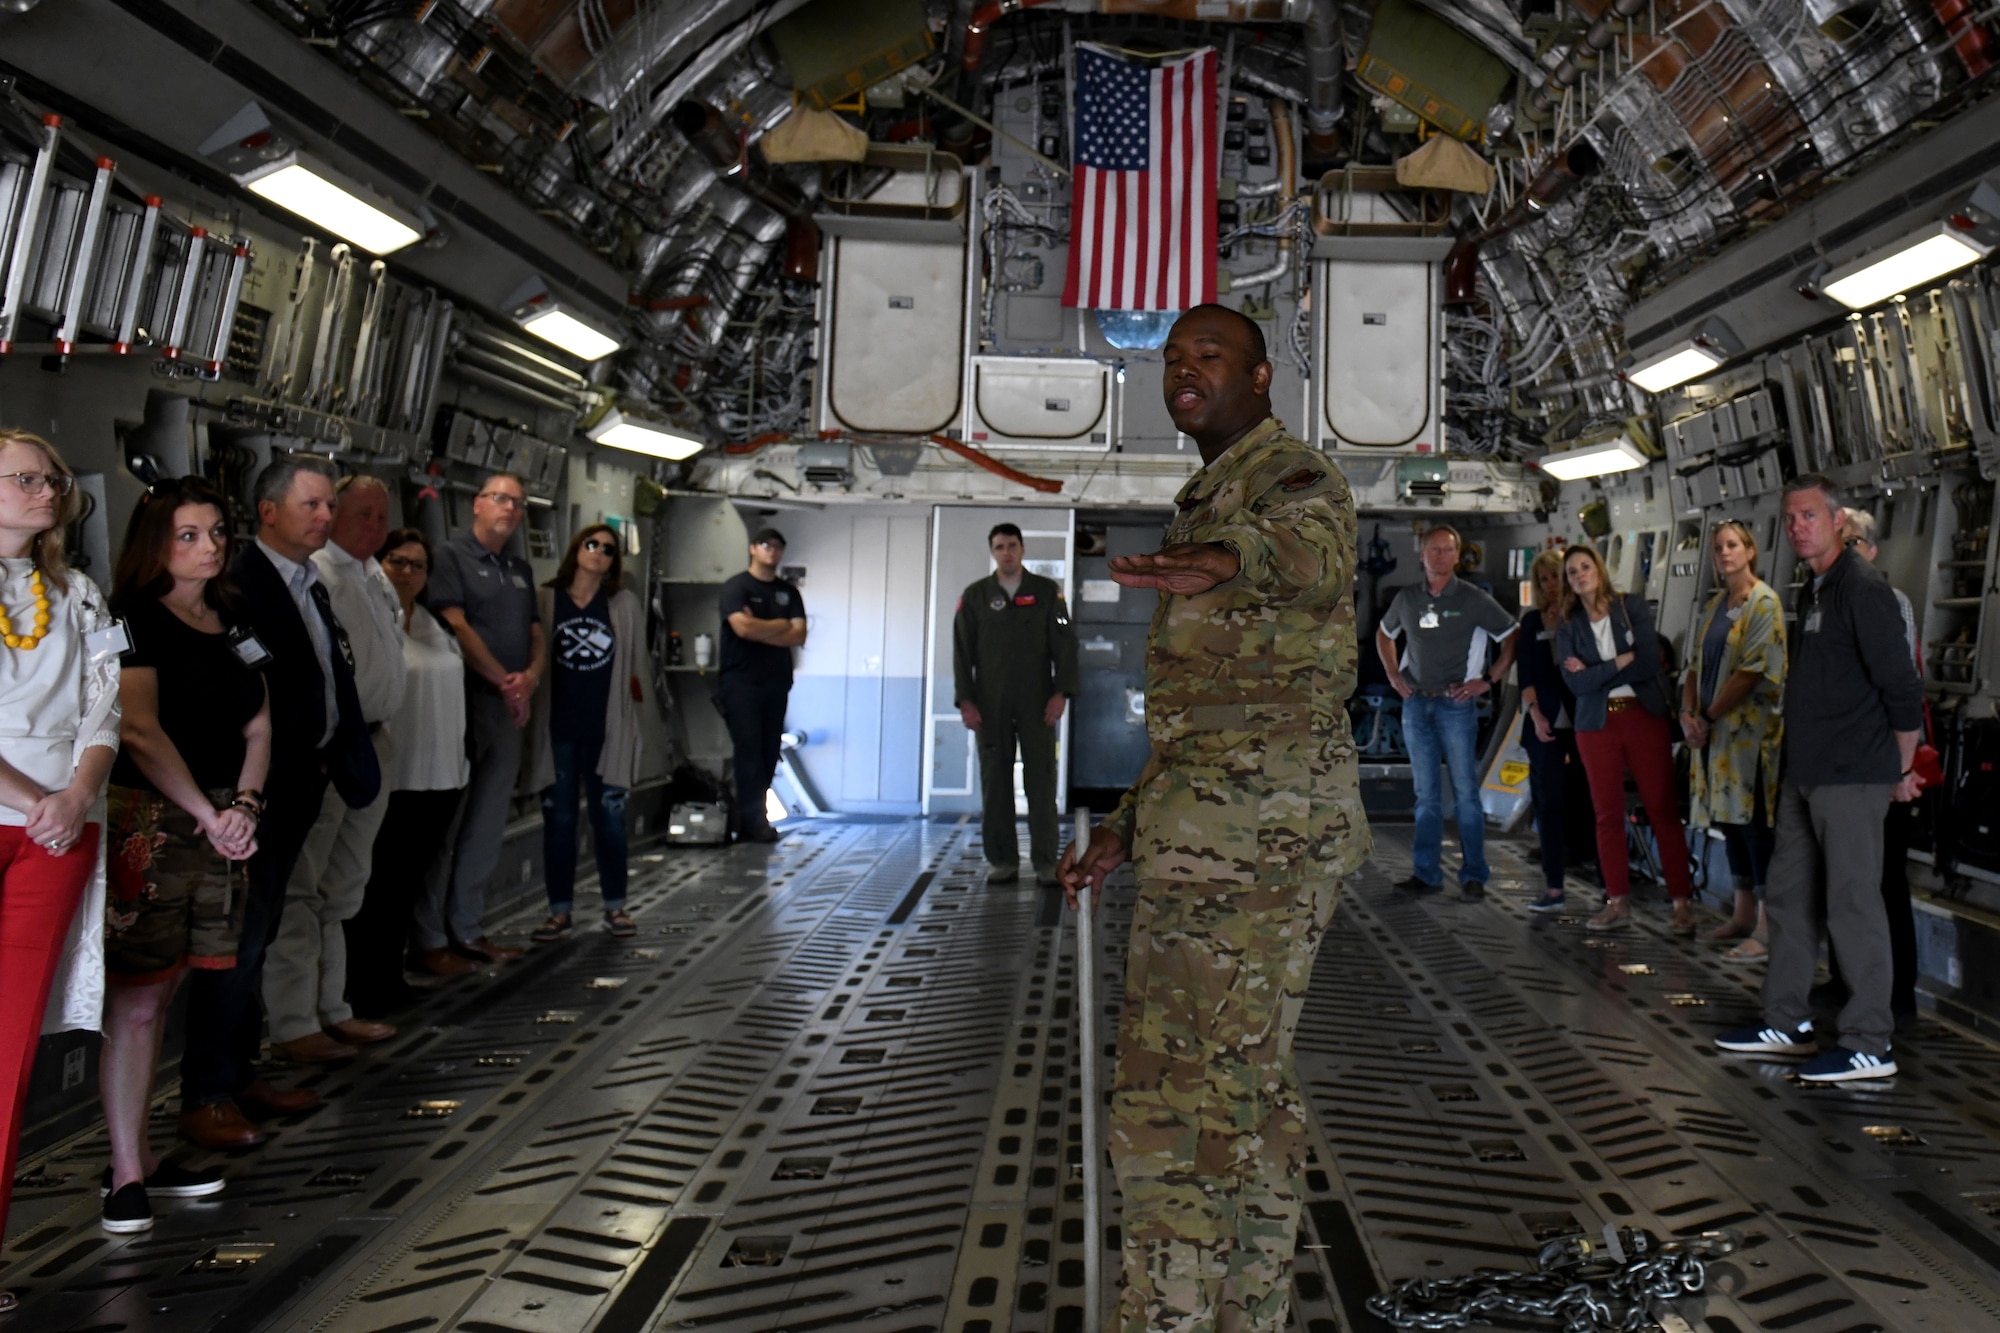 Tech. Sgt. Arthur Wilborn, 58th Airlift Squadron loadmaster, explains the capabilities of the C-17 Globemaster III to honorary commanders during the Honorary Commanders Boot Camp, May 31, 2019, at Altus Air Force Base, Okla. The honorary commanders were guided around the installation in order to provide them a better idea of where their assigned unit fits into the mission of the 97th Air Mobility Wing. (U.S. Air Force Photo by Senior Airman Jackson N. Haddon)